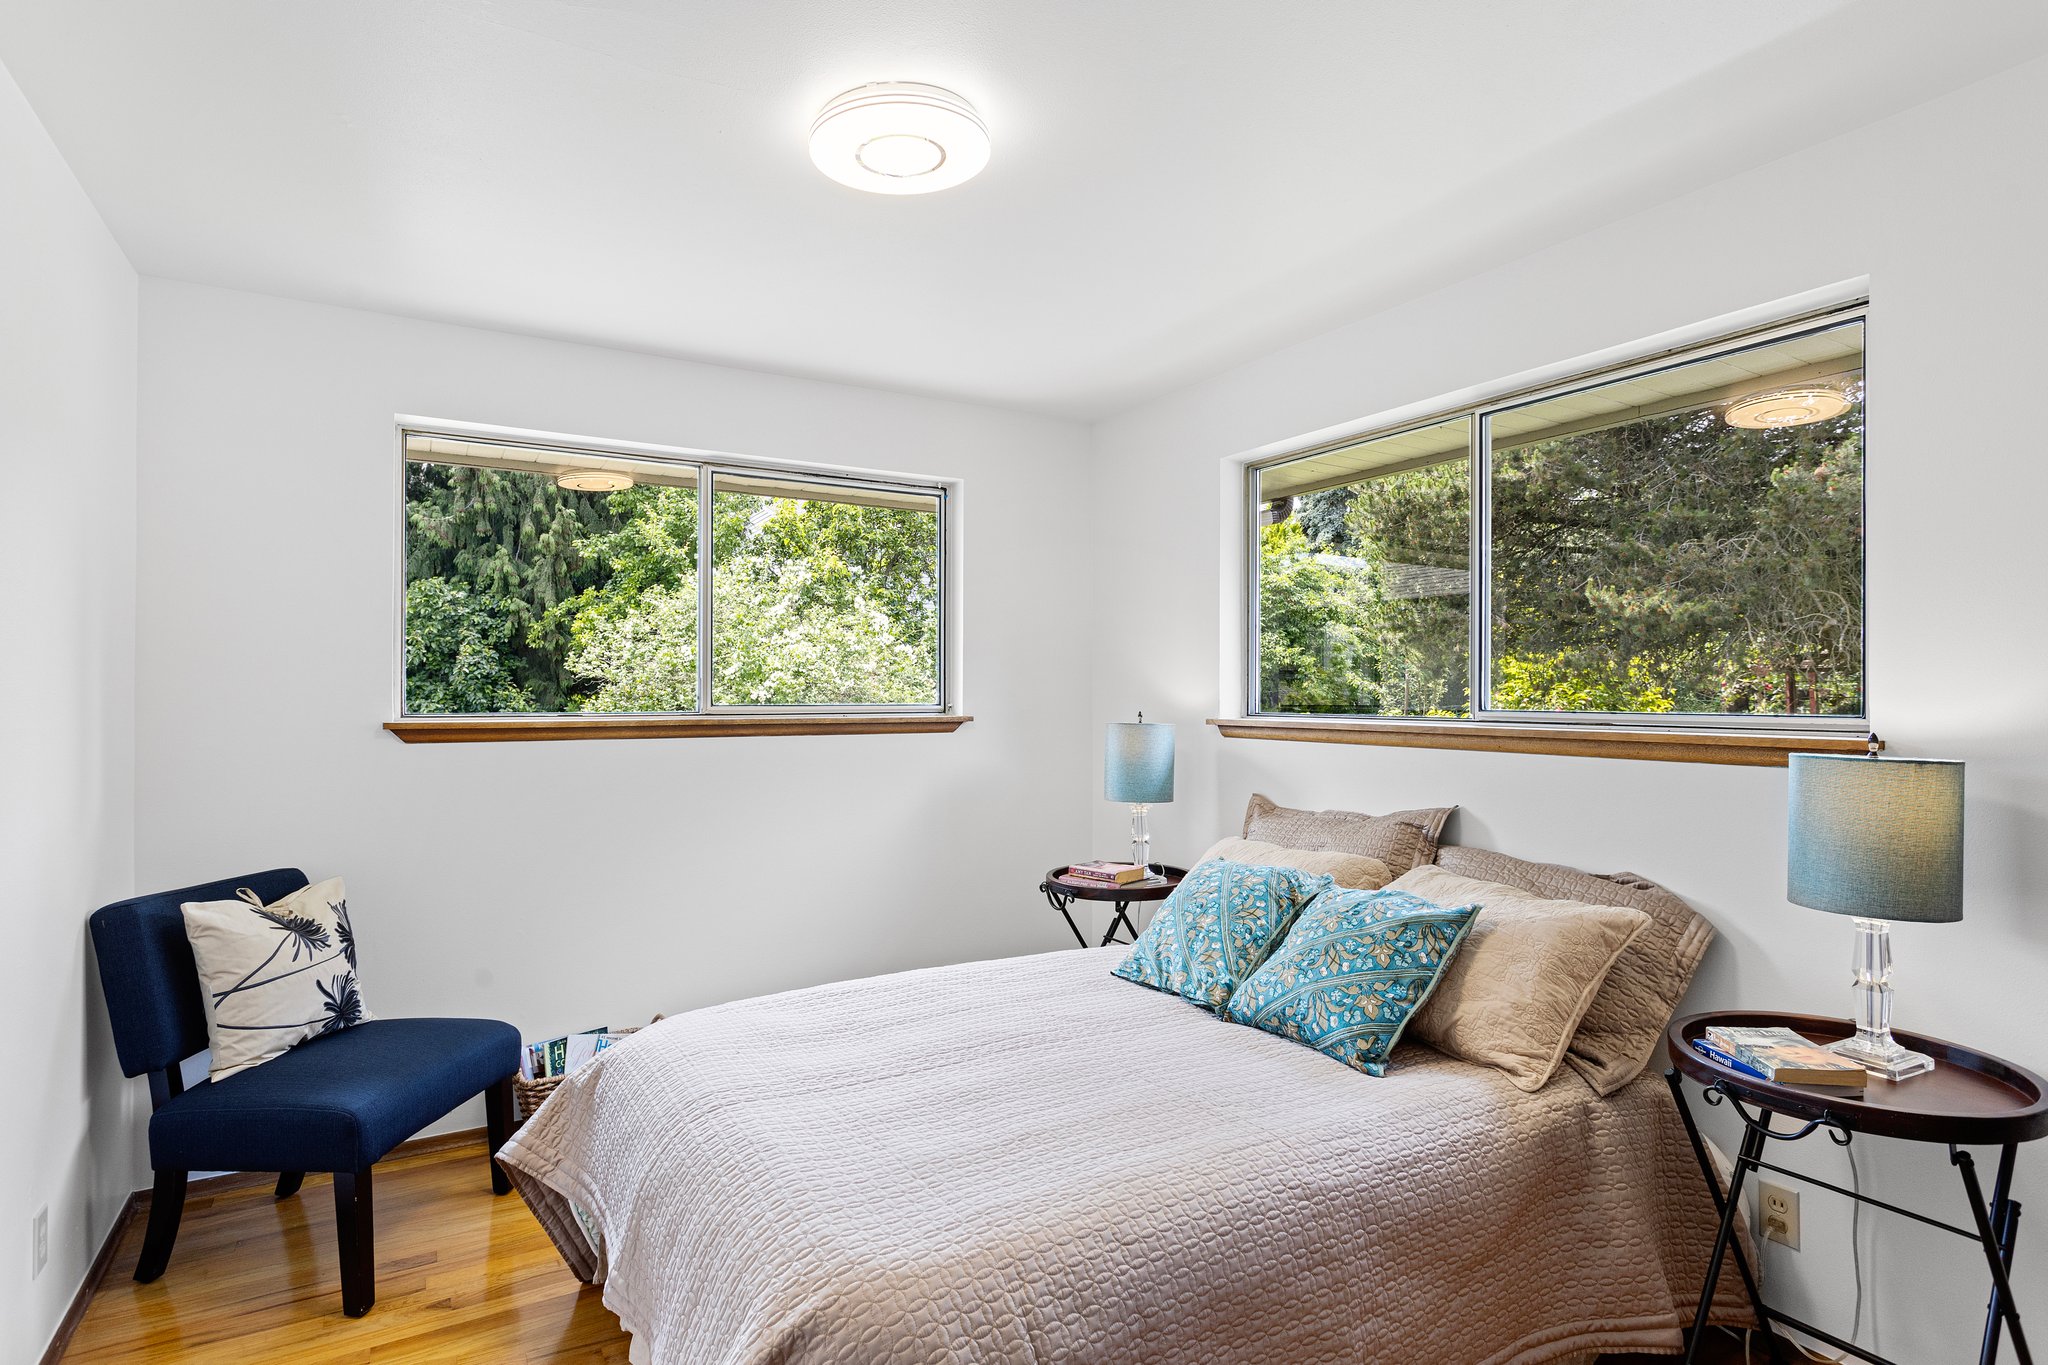 The southwest bedroom is the brightest of the bunch, with windows to the south and west, and a lush green view of the backyard.